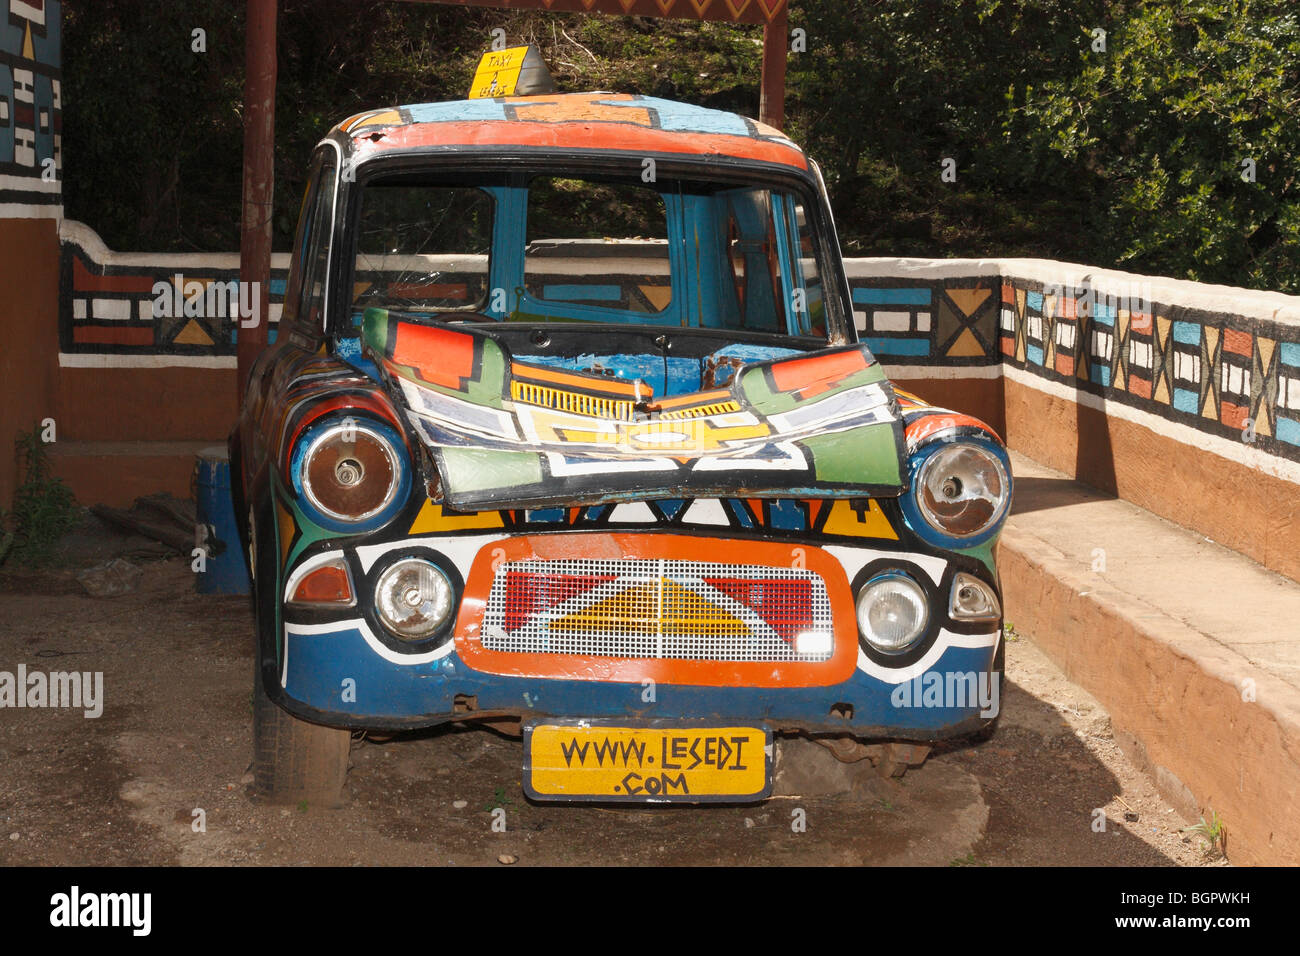 Vintage old broken car painted Ndebele geometric mixed vivid colors of South African natives at Lesedi village, S. Africa, Stock Photo